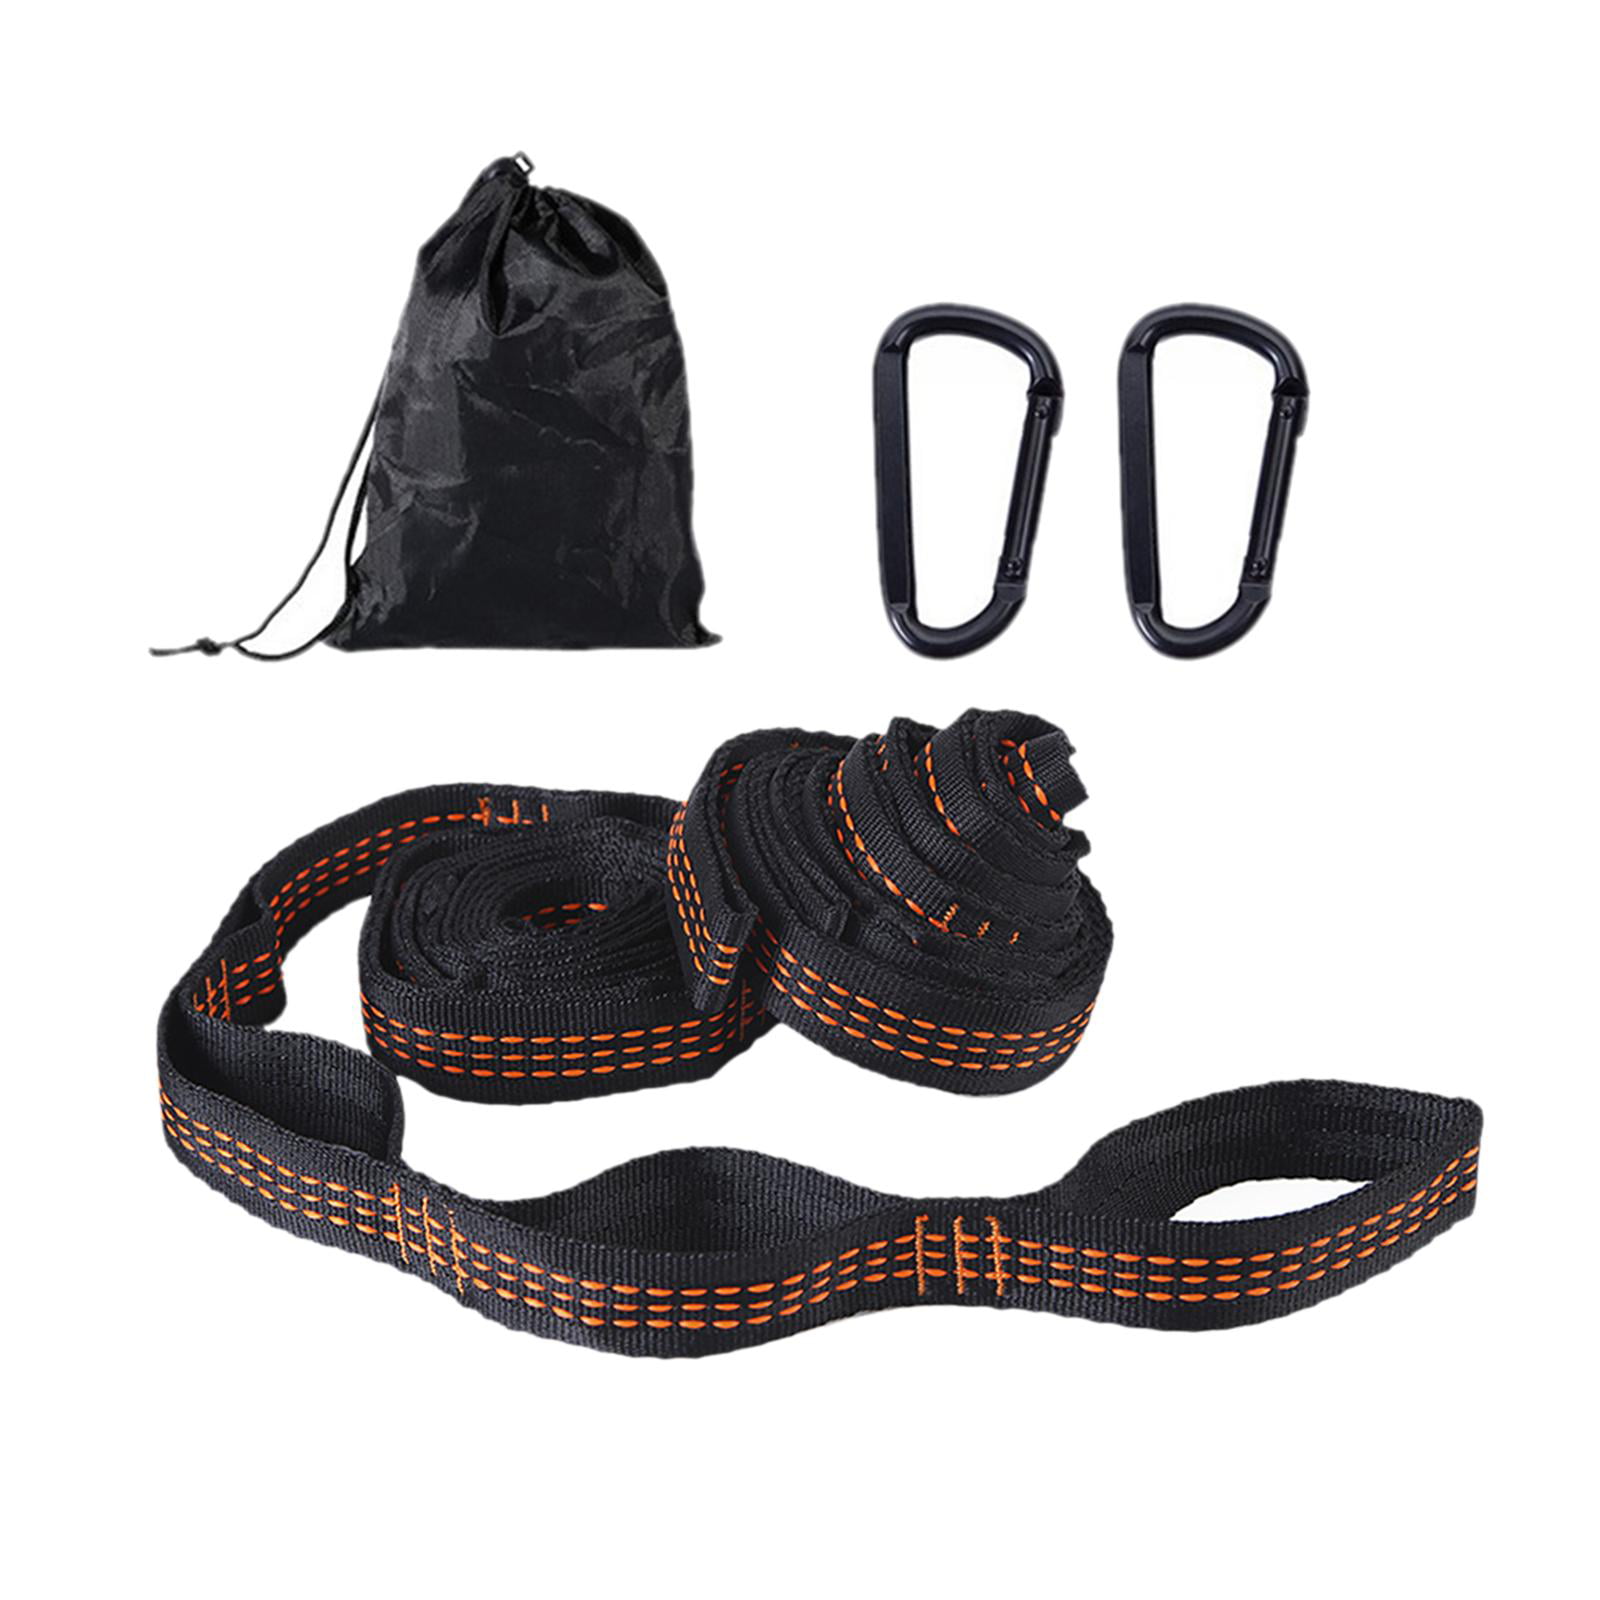 Hammock Hanging Strap Kit GeeRic Tree Swing Straps Holds Up to 500 Kg with Storage Bag 1.5m with 2 Tree Protection Pads and 2 Premium Carabiners 2 Pieces 